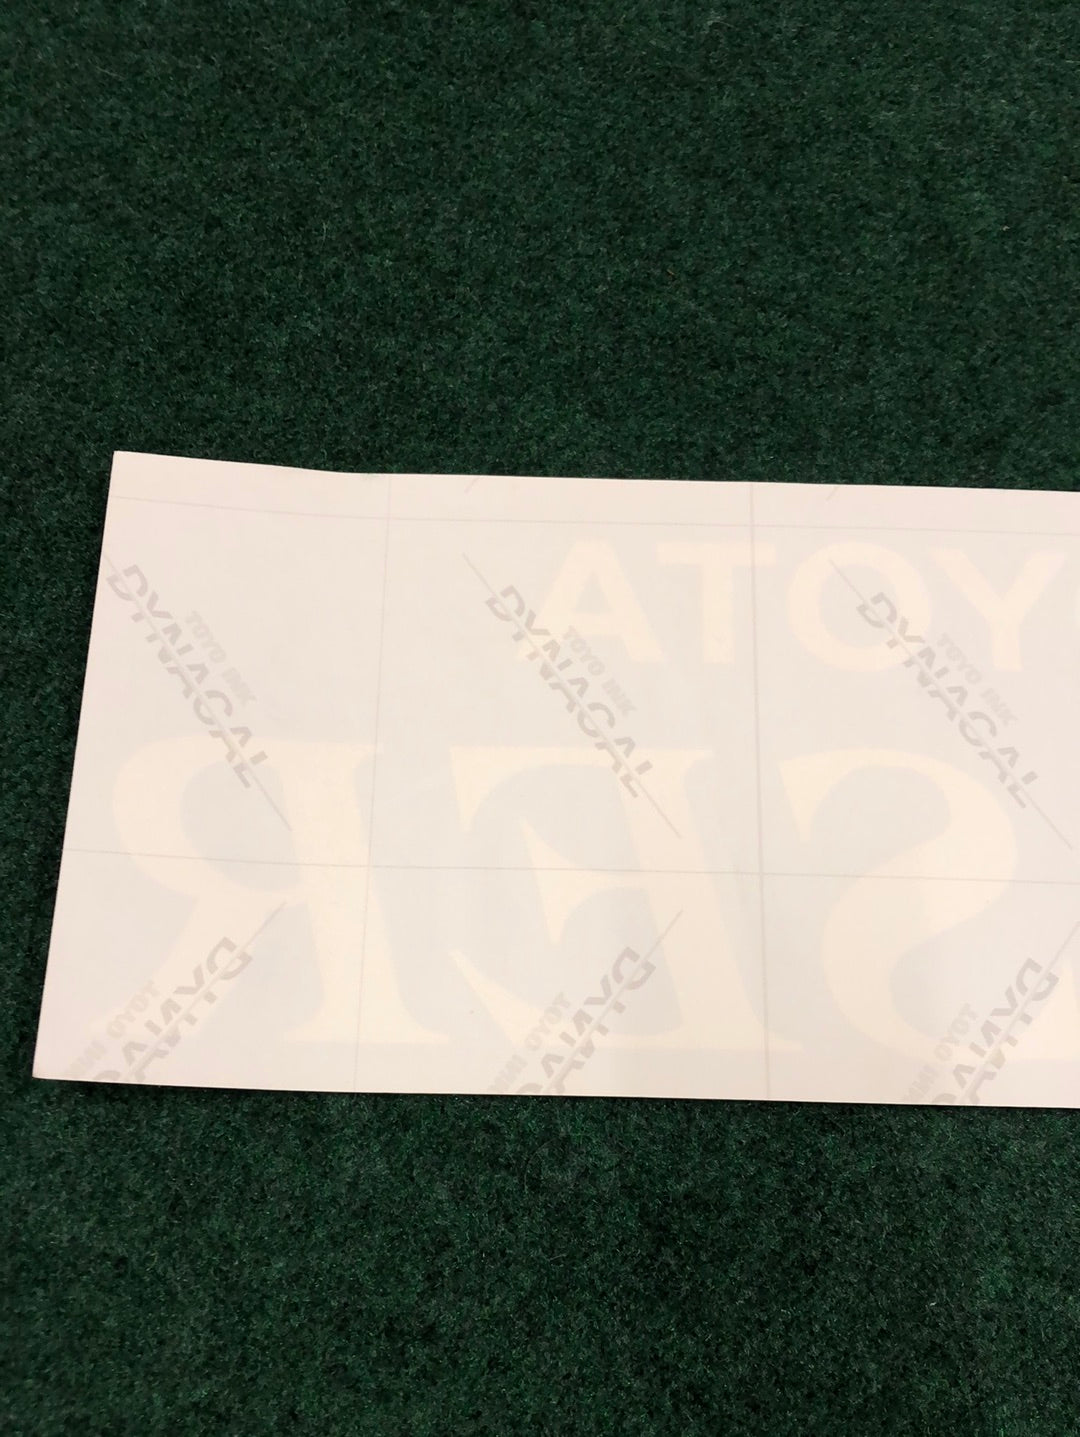 Toyota Chaser JZX100 Large Decal - White